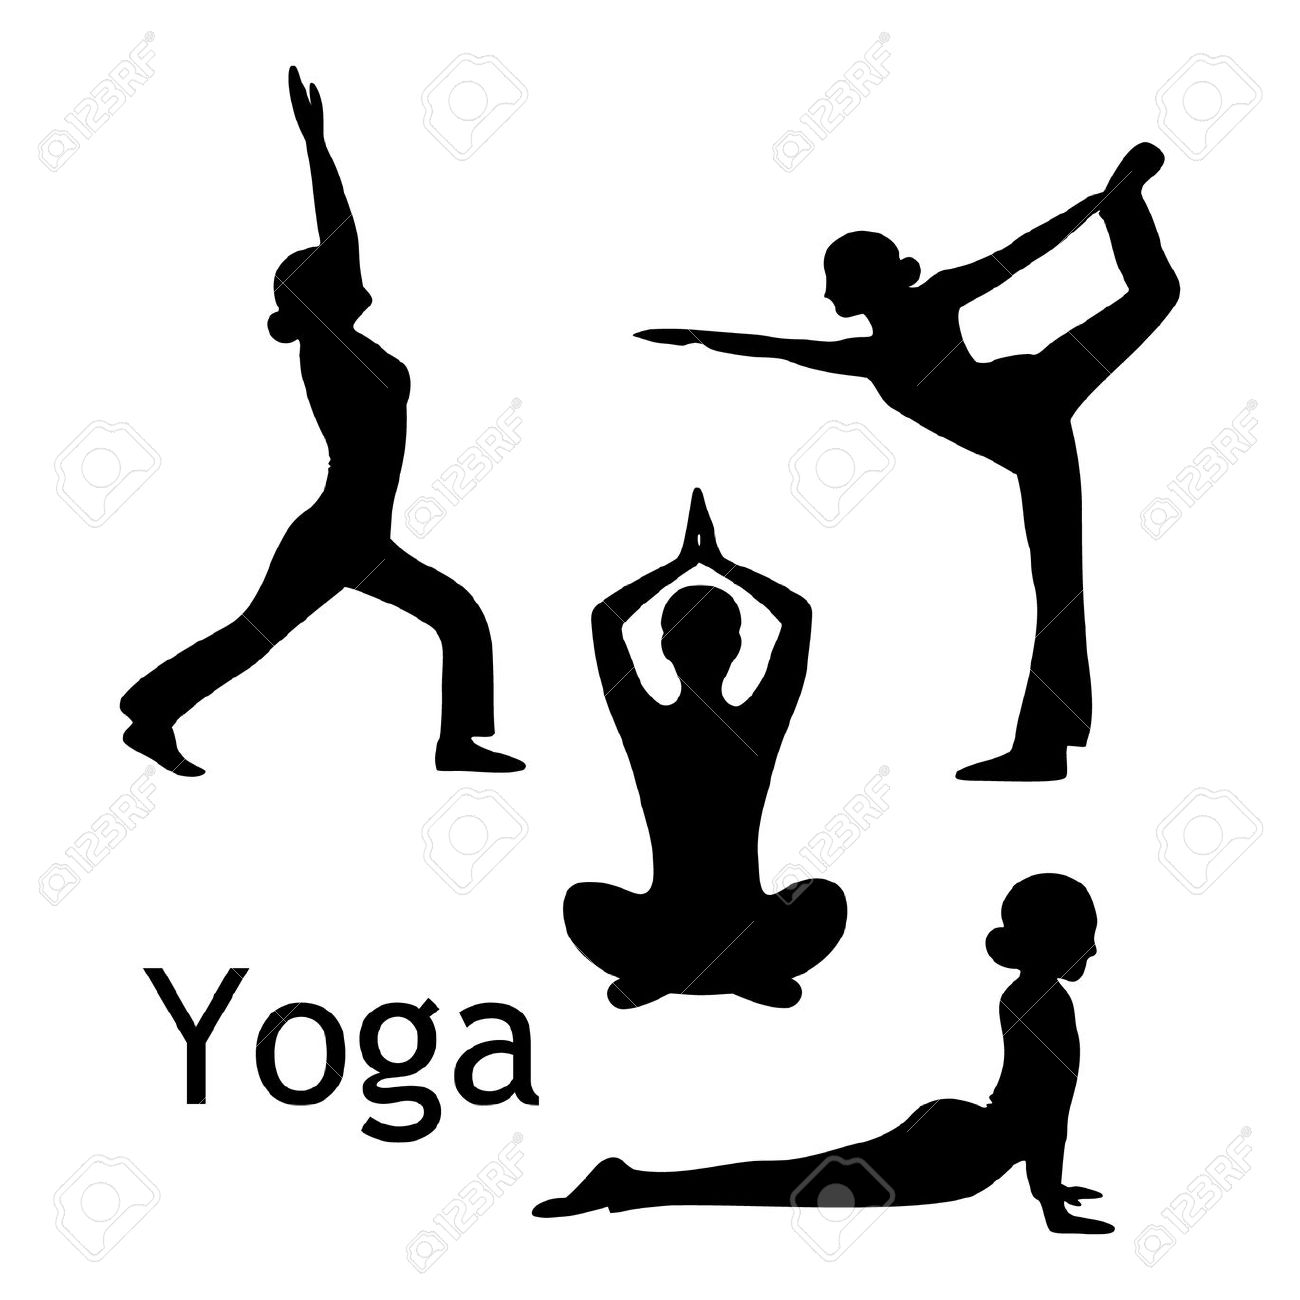 Download Yoga Pose Clipart